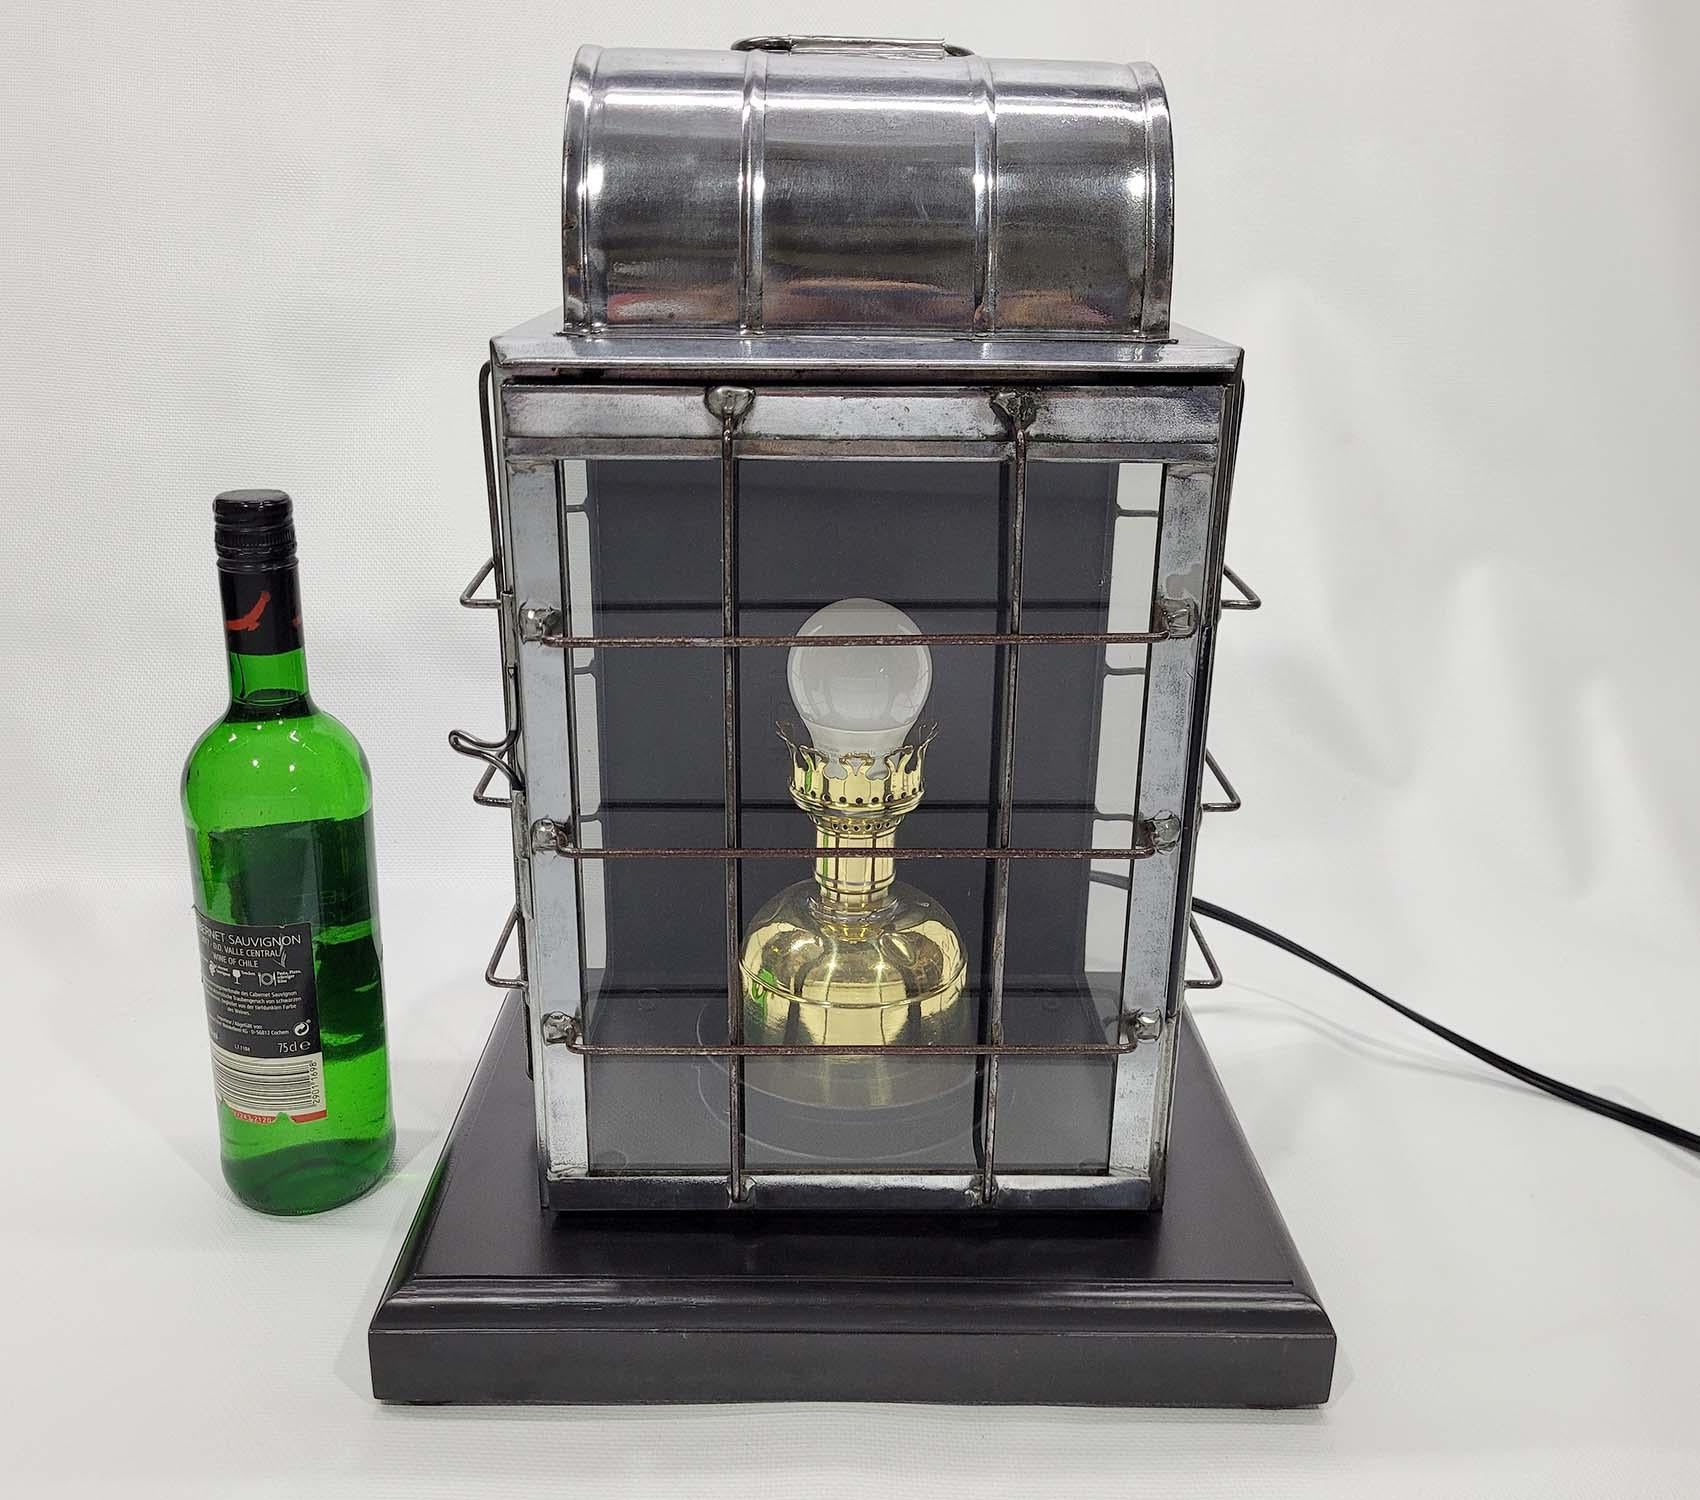 Ships lantern by the National Marine Lamp Company. Polished steel case with protective wire cage. The brass burner has been fitted with an electric socket. The lantern has been mounted to a custom-made wood base. Circa 1910

Weight: 13